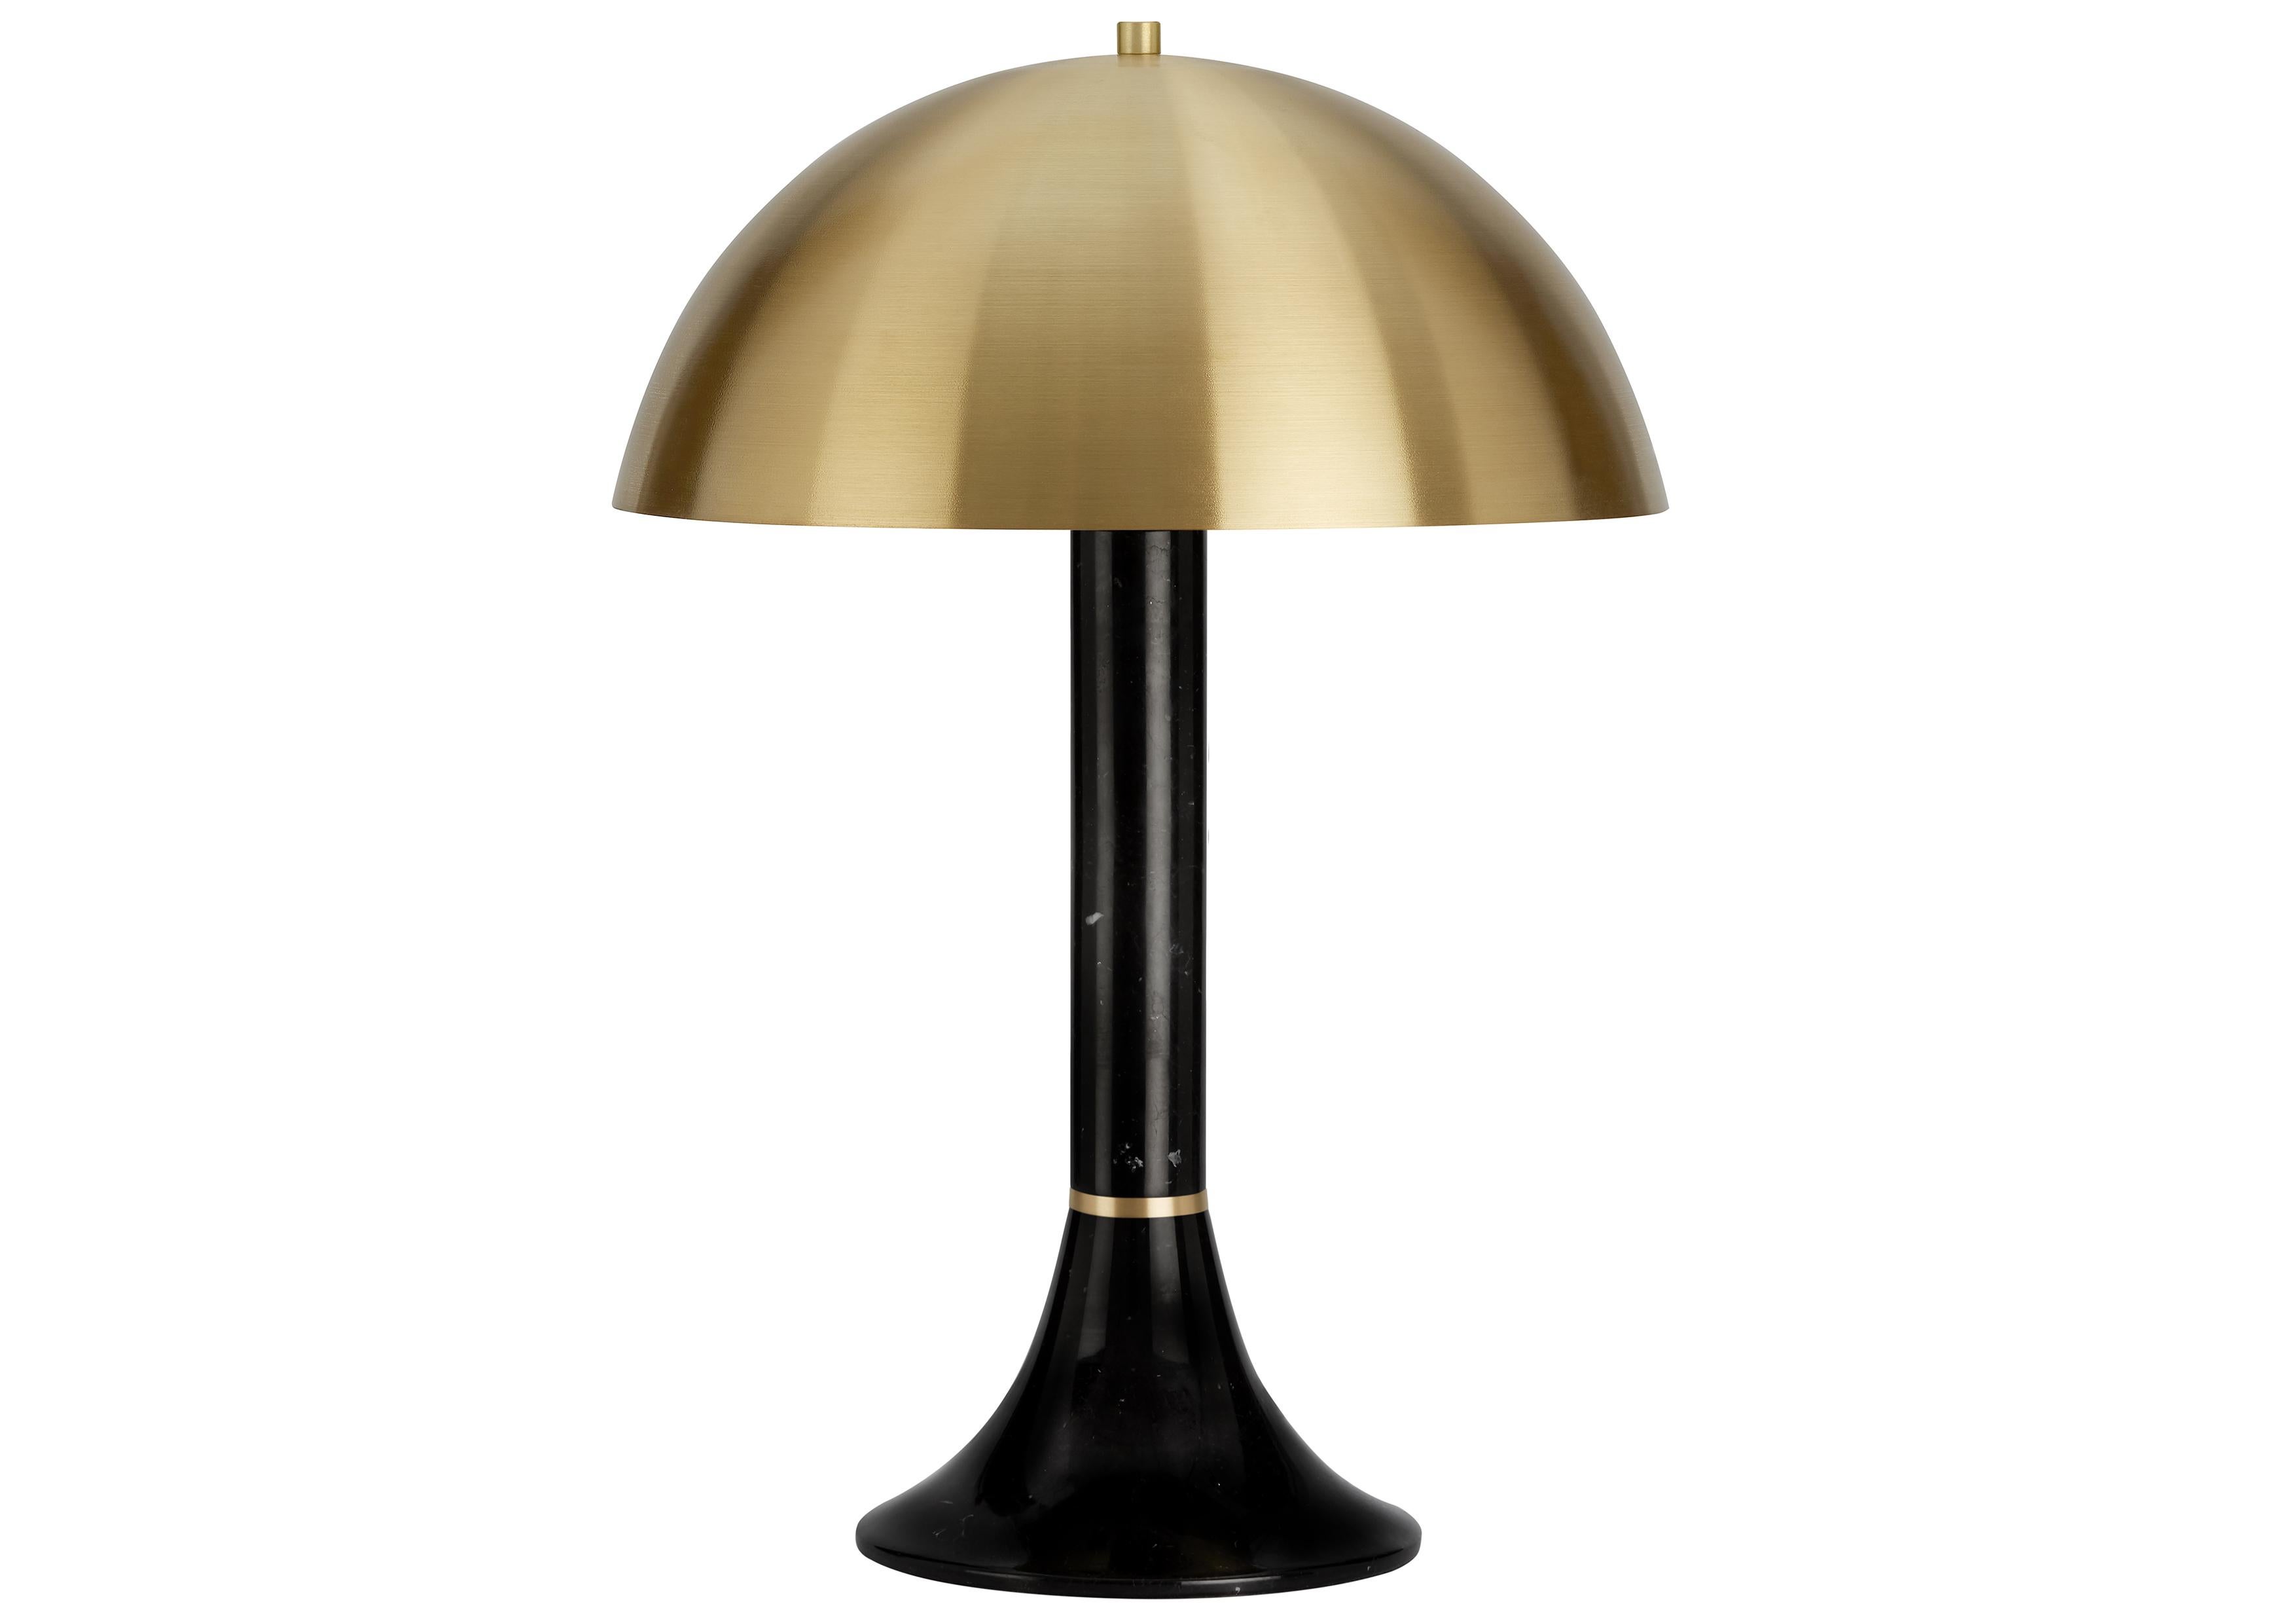 Regent table lamp by CTO Lighting
Materials: polished black marquina marble with satin brass
Also available in polished white carrara marble with satin brass

Dimensions: H 45 x W 30 cm 

All our lamps can be wired according to each country.